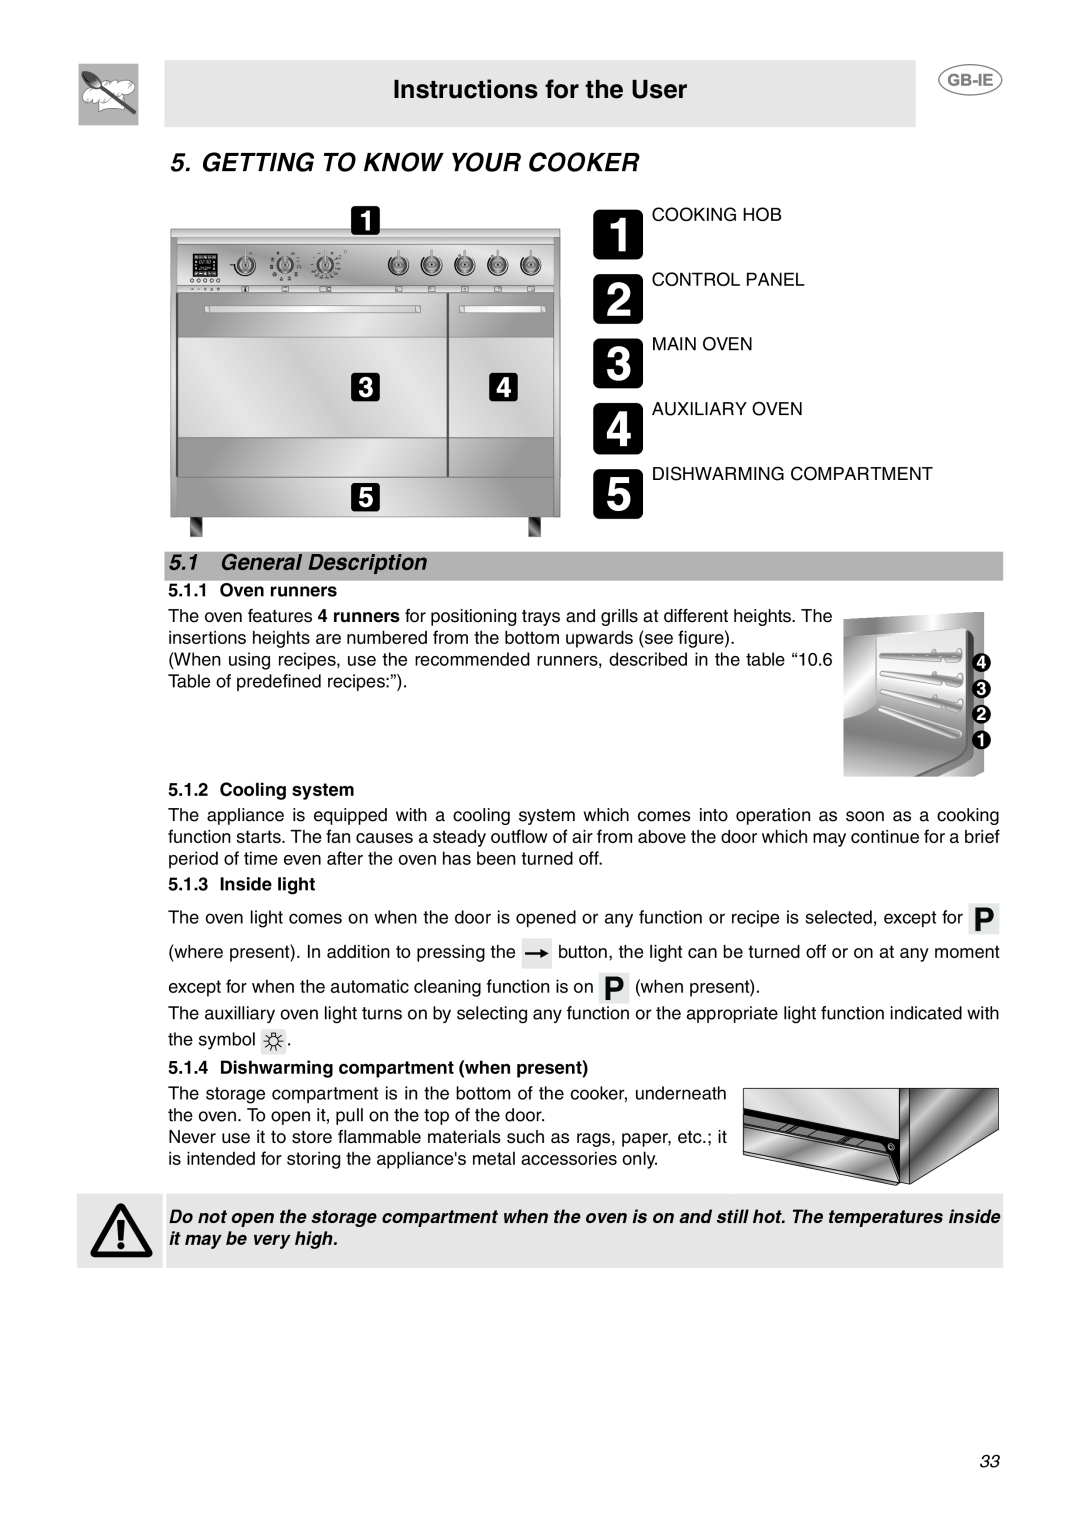 Smeg CE92CMX Instructions for the User, Getting To Know Your Cooker, General Description, Oven runners, Cooling system 